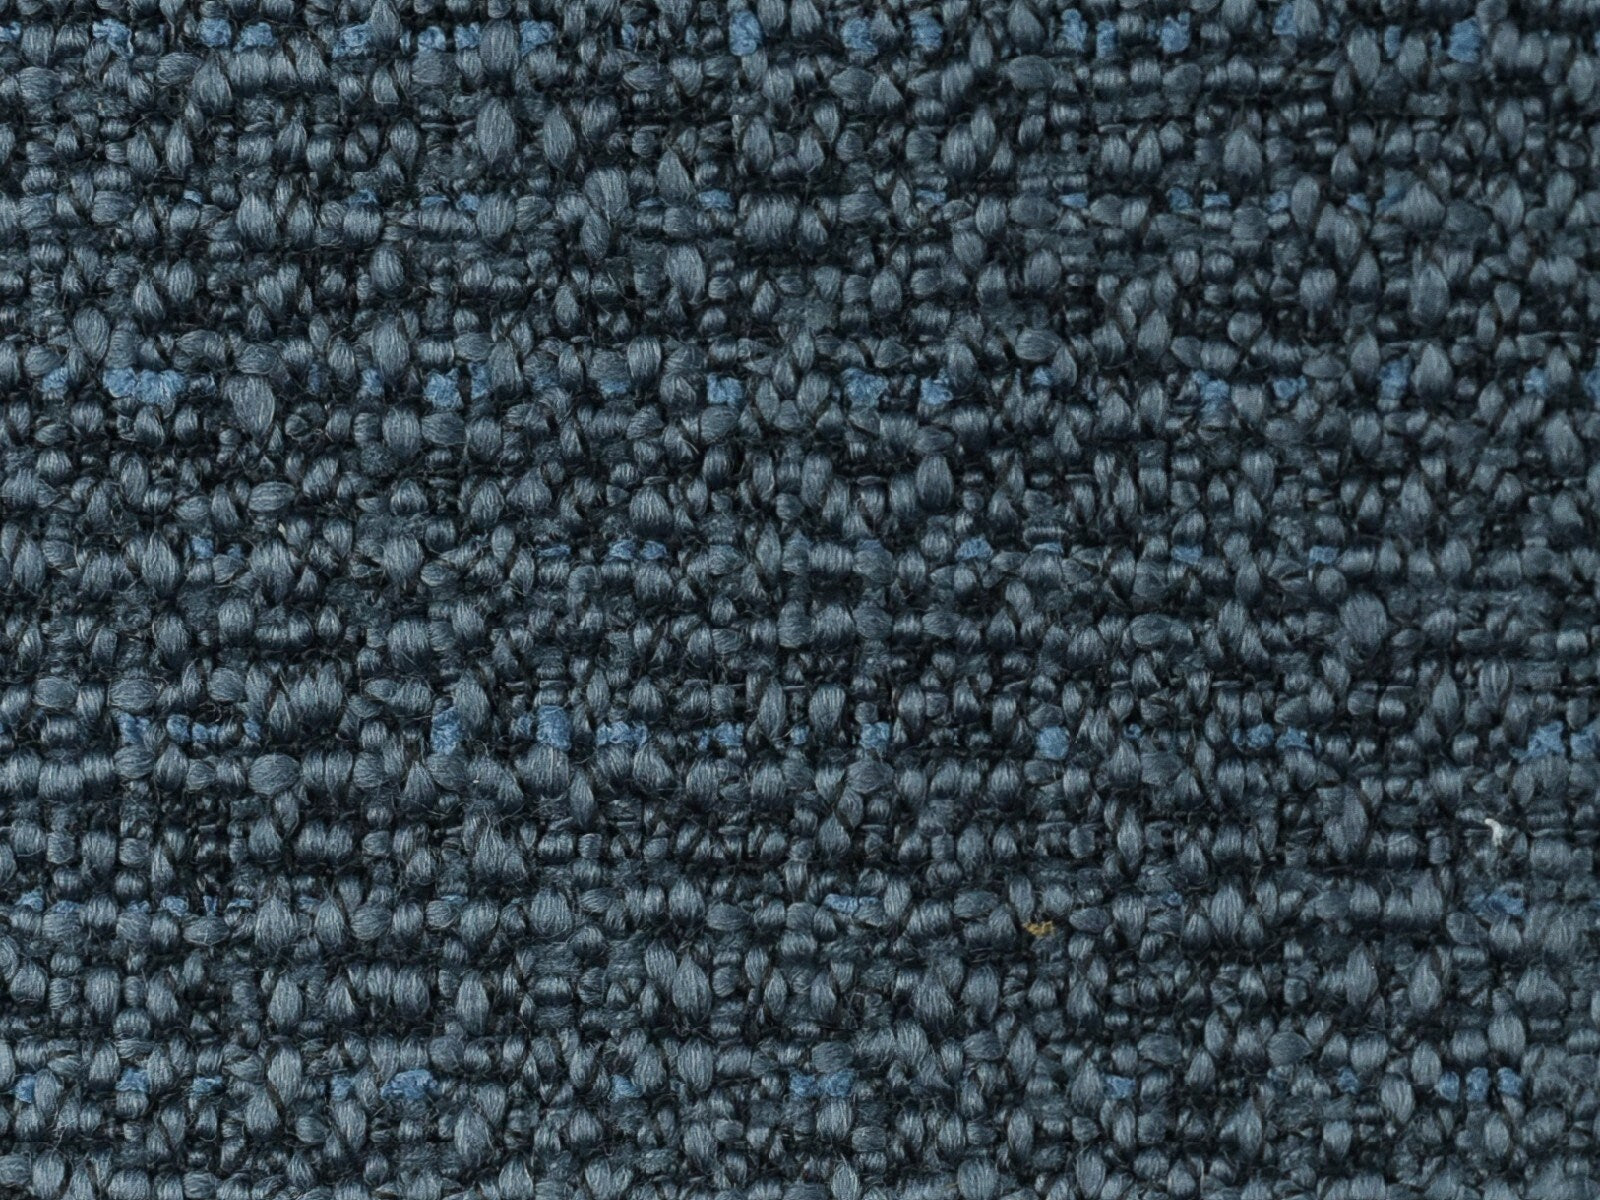 Contemporary Coarse Woven Textured Upholstery Fabric By The Yard 57"W/600GSM-Capability Ensign Blue